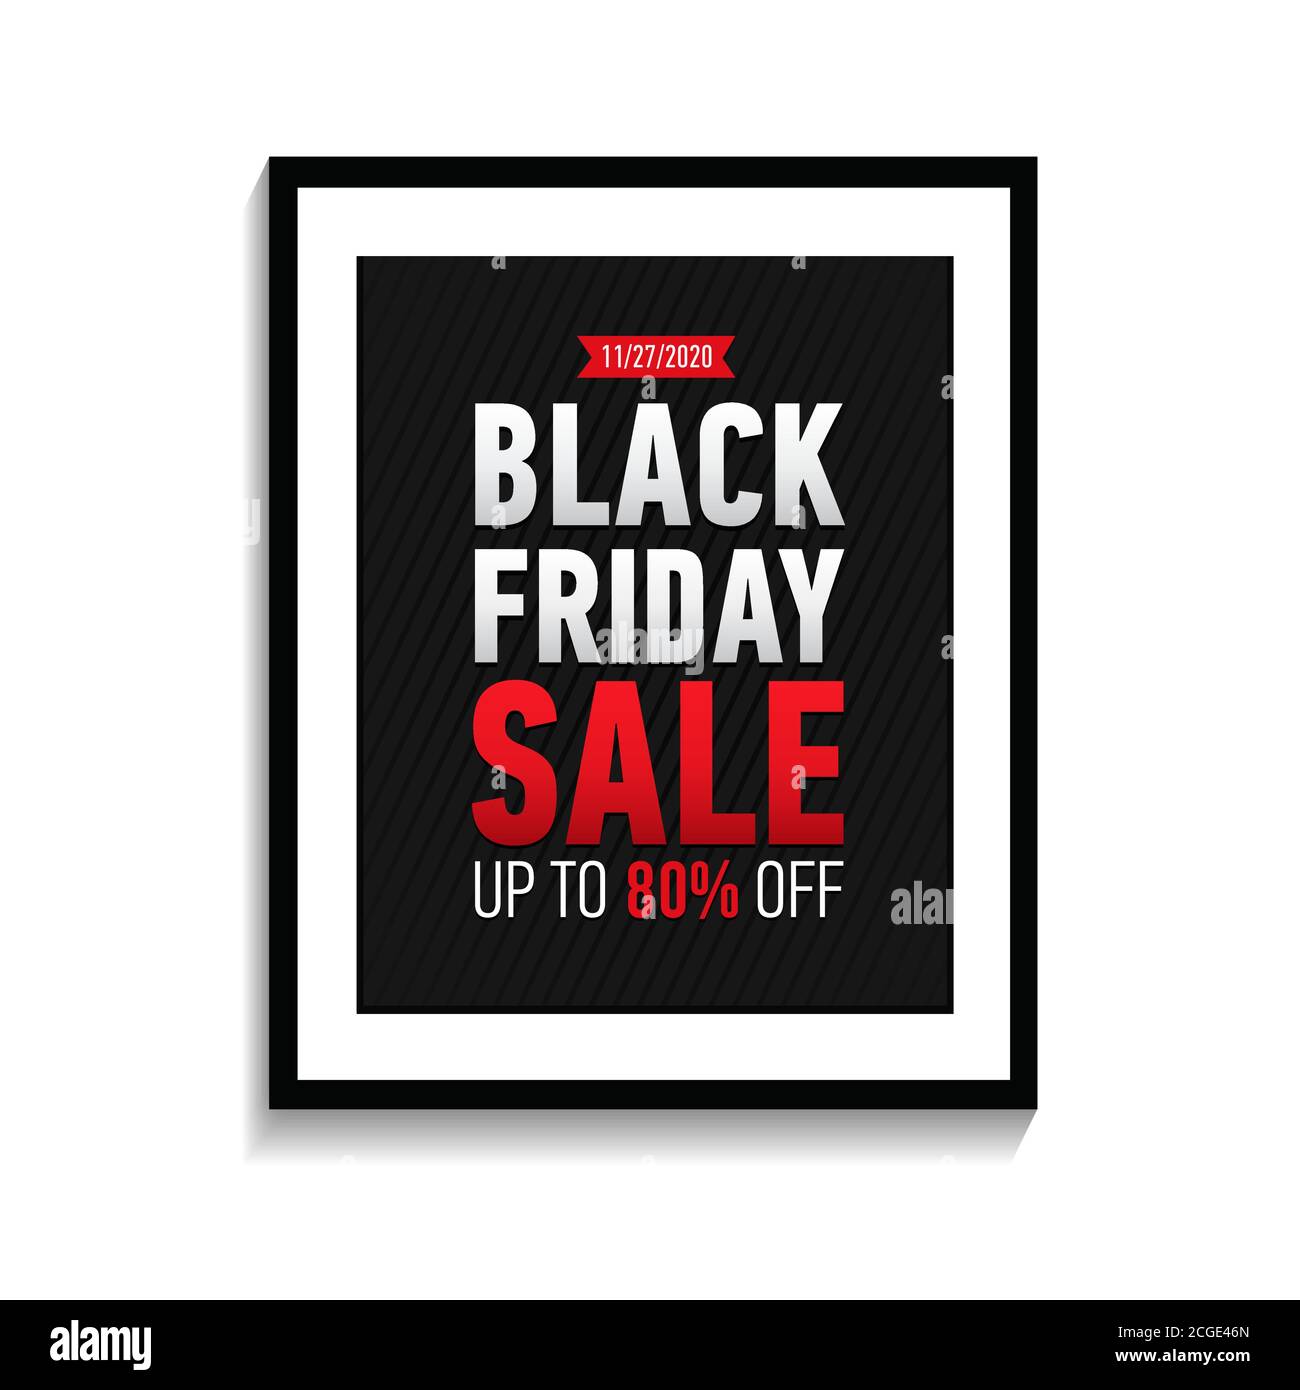 Black friday sale poster in black frame on white wall. Black Friday banner isolated on white background. Black friday sale up to 80 off Stock Vector